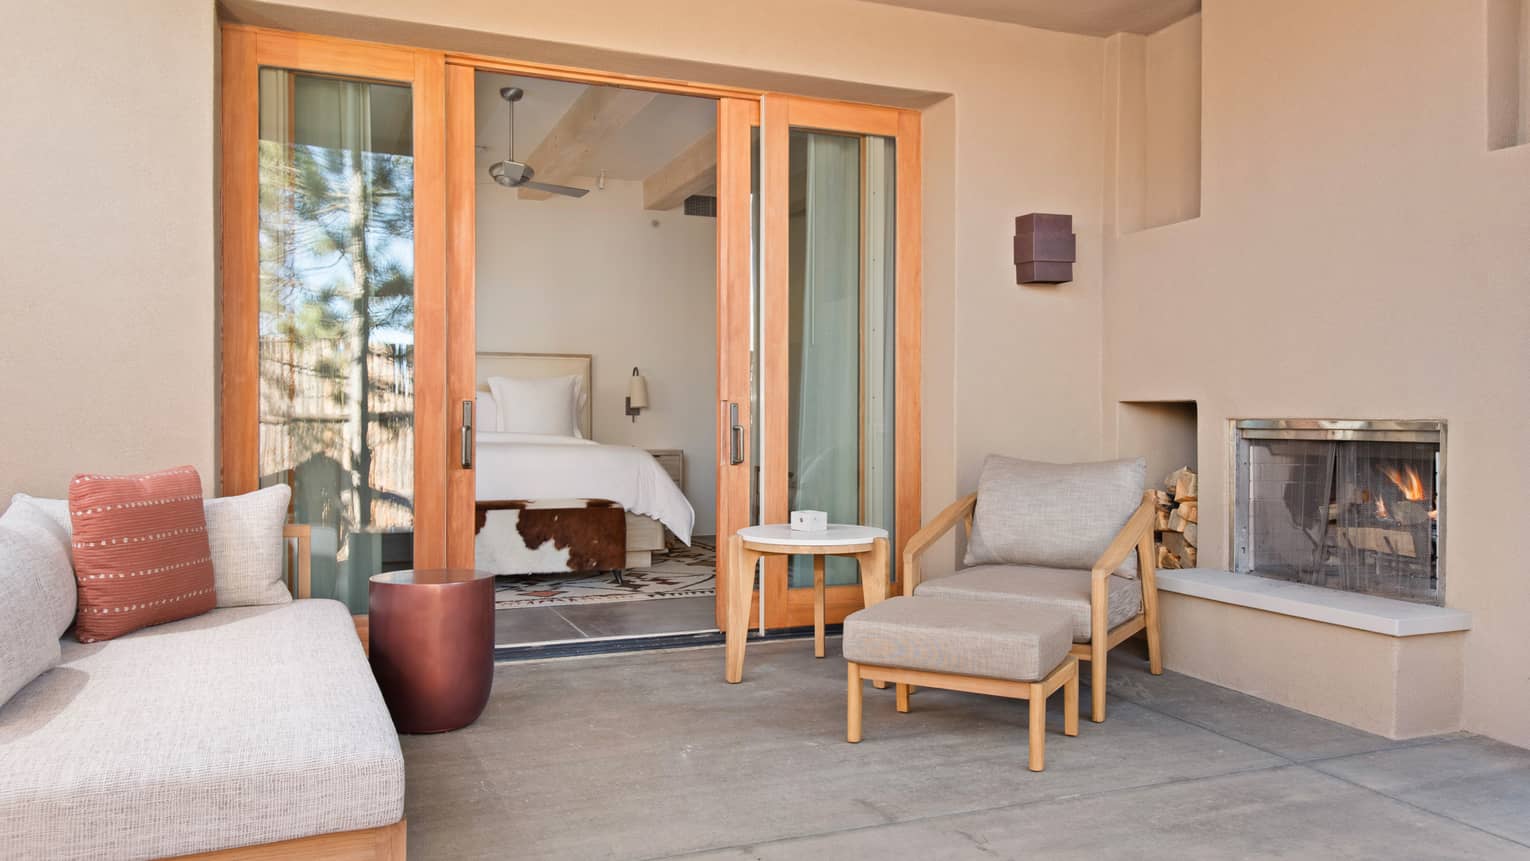 Private patio of a Casita Room, complete with fireplace and lounge chairs, at Four Seasons Resort Santa Fe